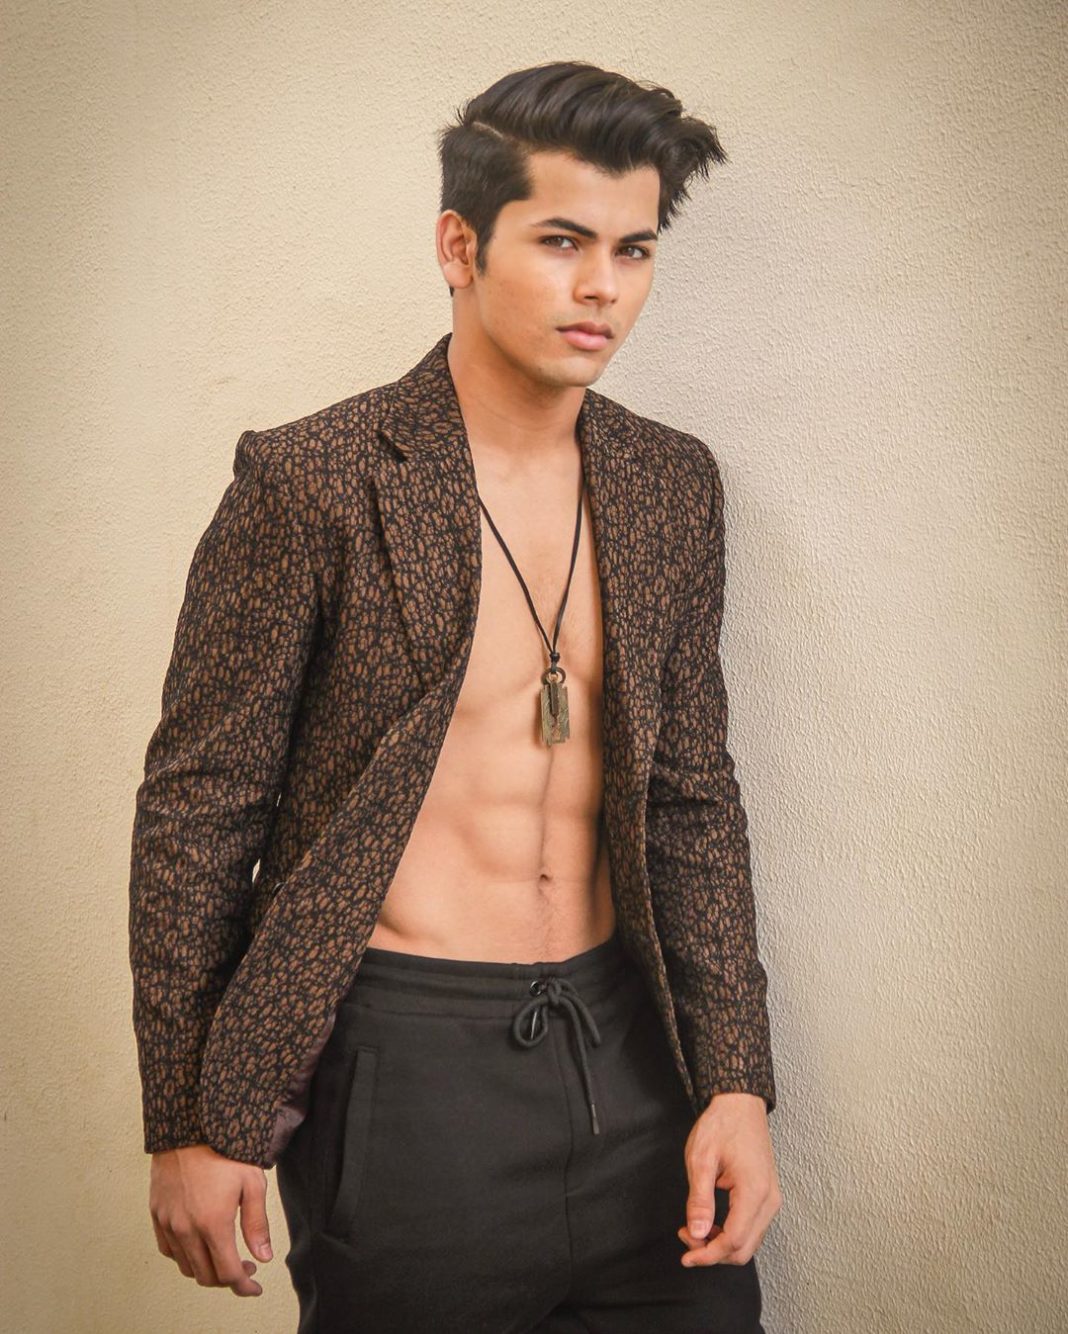 Siddharth Nigam taking internet by storm with THESE latest photos ...